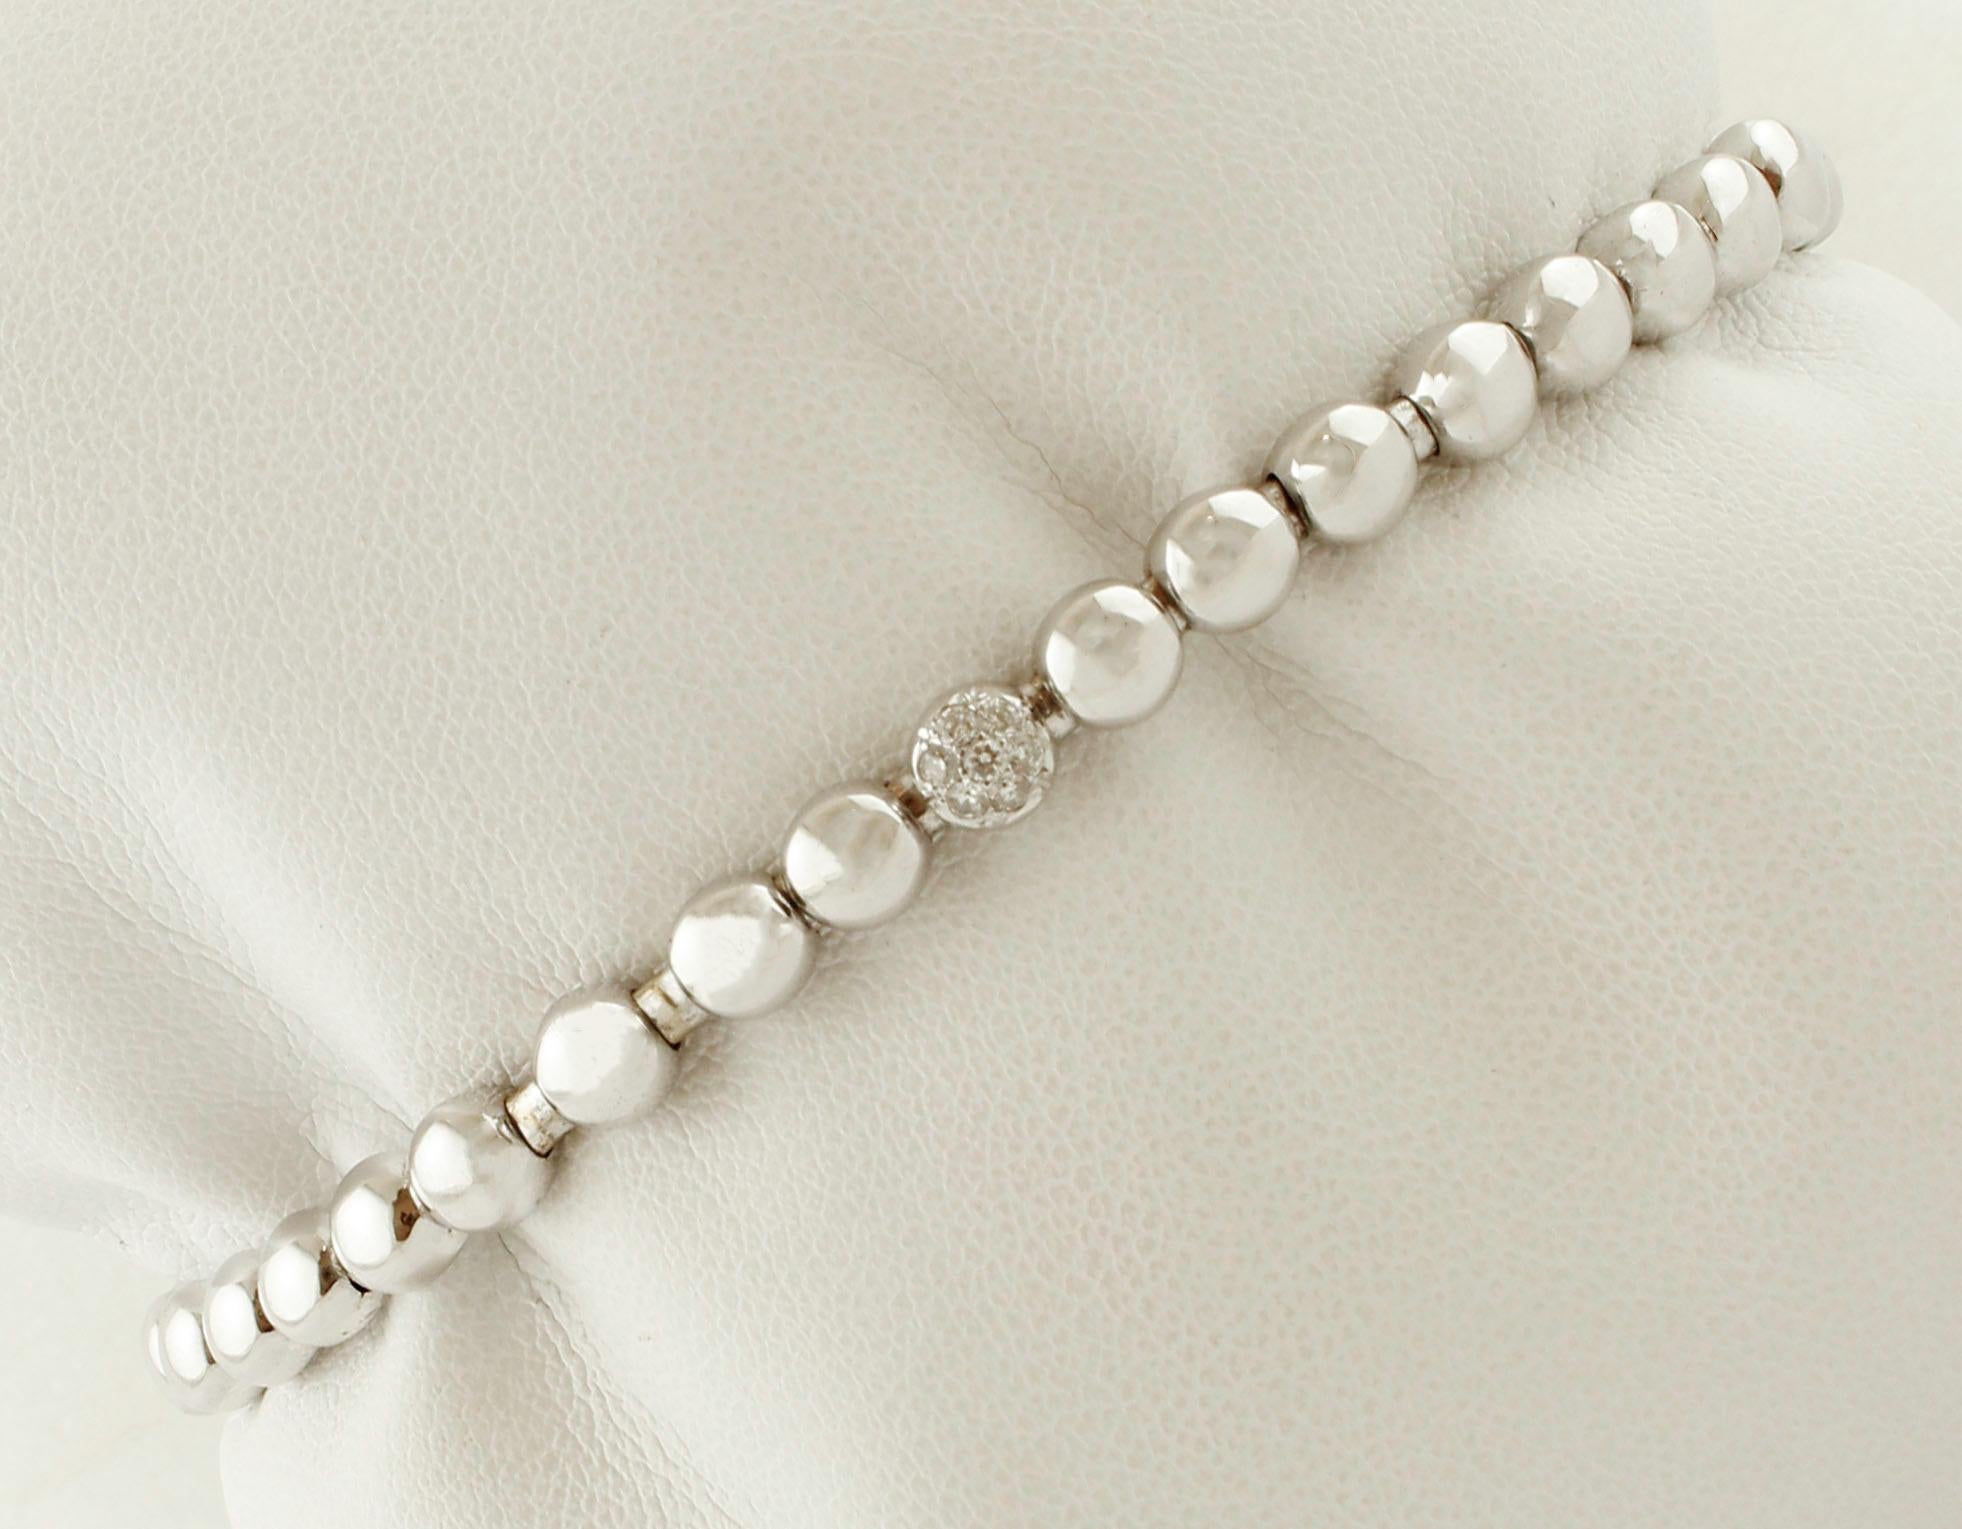 SHIPPING POLICY: 
No additional costs will be added to this order. 
Shipping costs will be totally covered by the seller (customs duties included).

Bracelet in 18k white gold beads with decoration of diamonds on the central bead.
This bracelet is